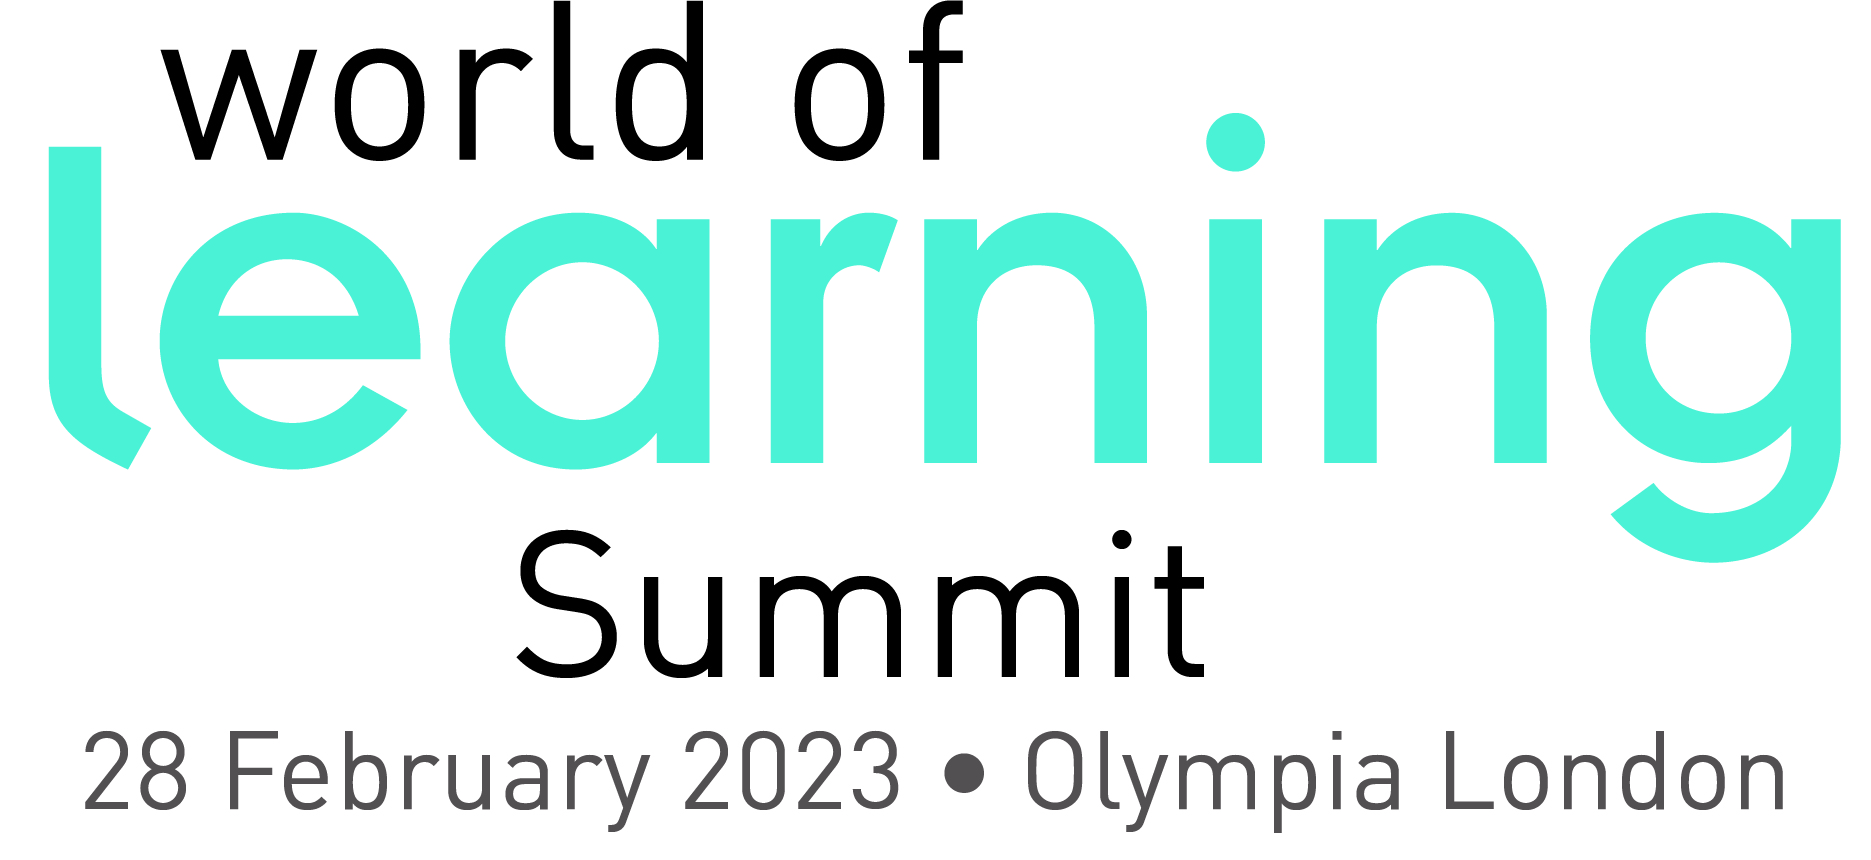 World of Learning Summit London February 2023 theHRDIRECTOR The